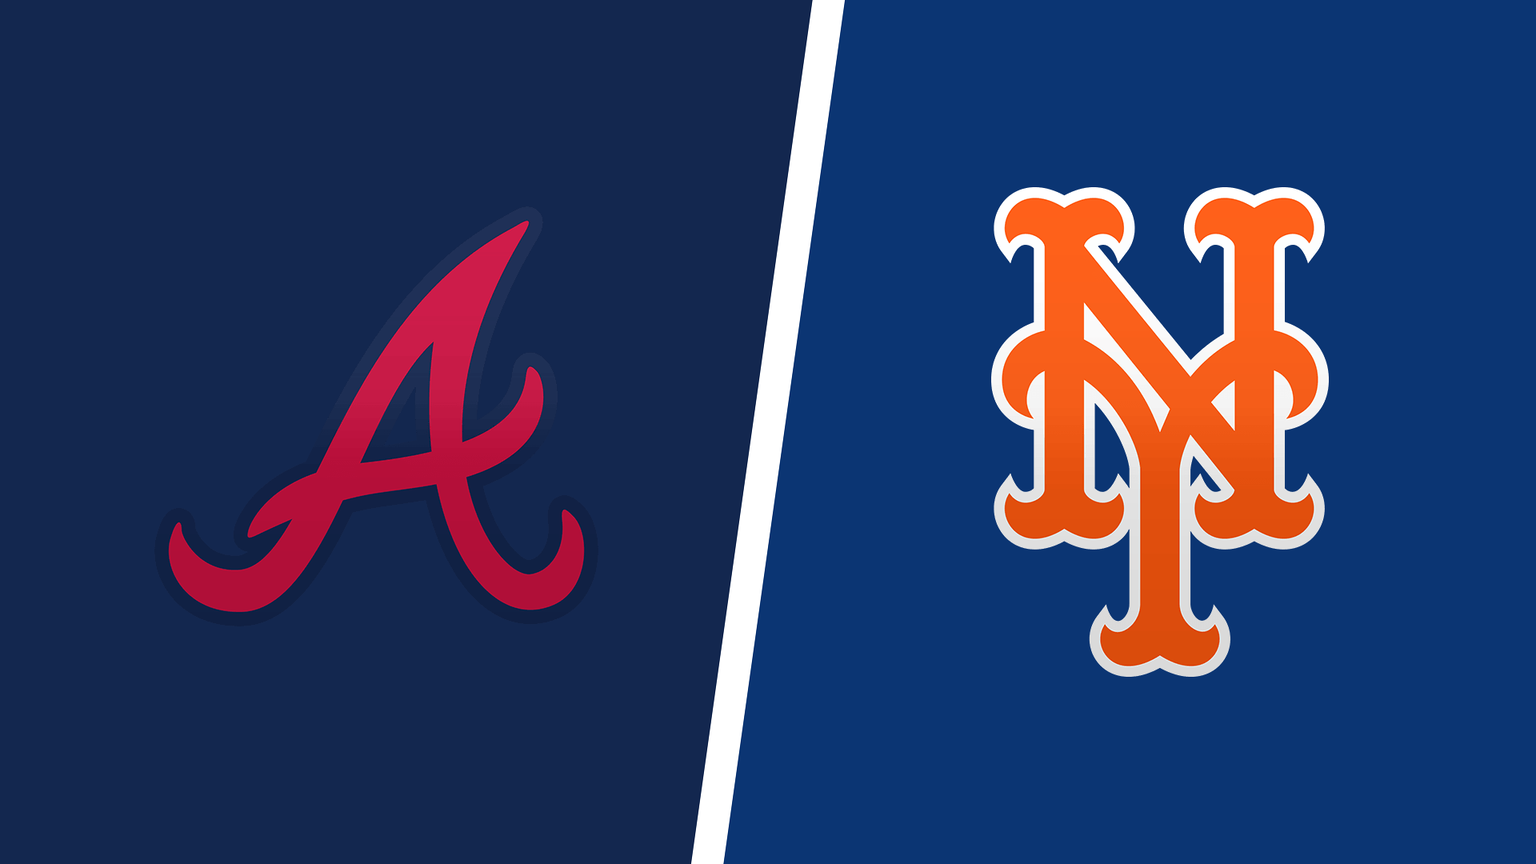 How to Watch Atlanta Braves vs. New York Mets Live Online on August 16